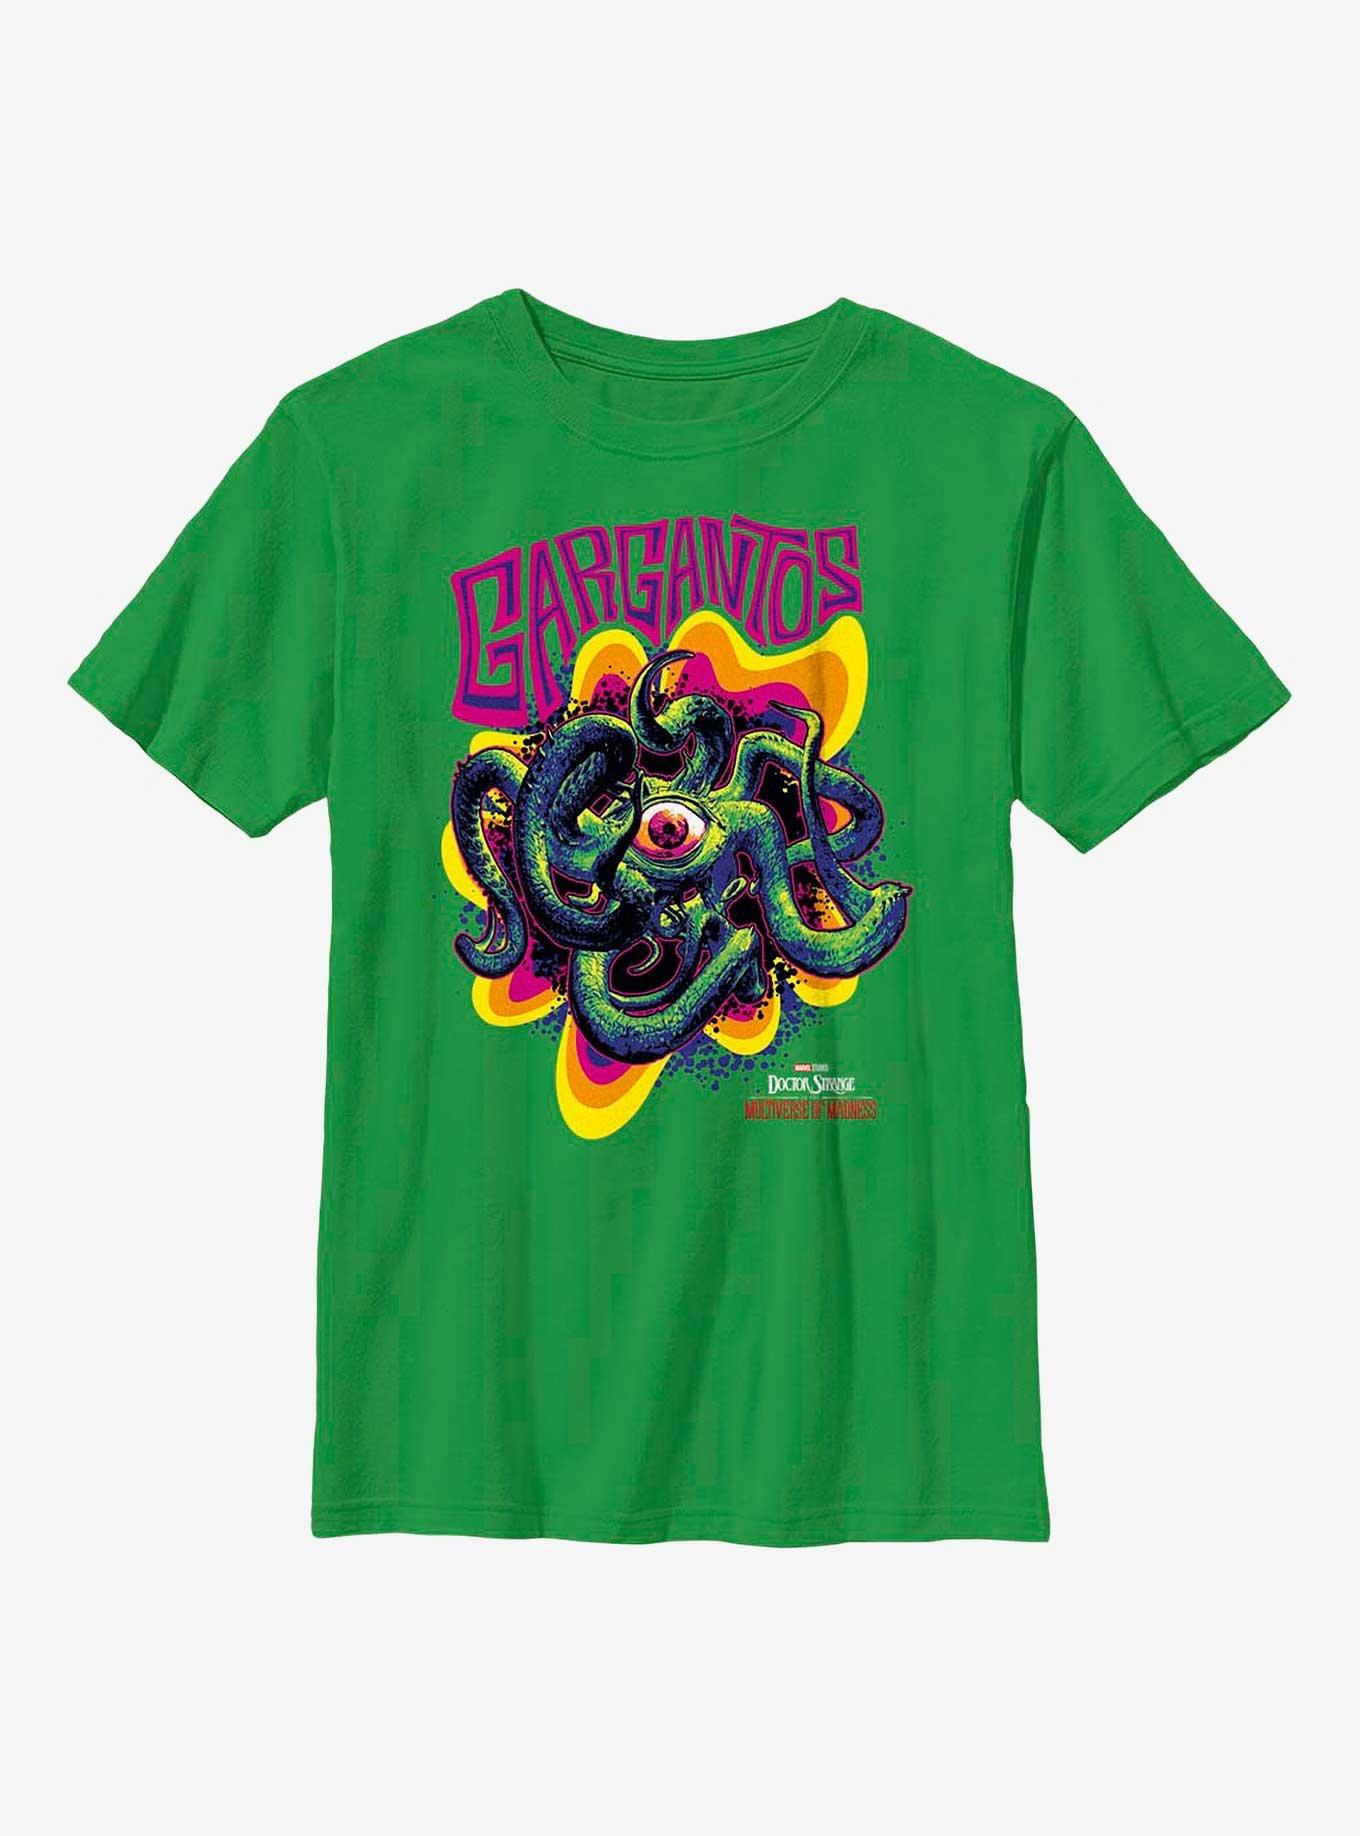 Marvel Doctor Strange In The Multiverse Of Madness Colorful Gargantos Youth T-Shirt, KELLY, hi-res